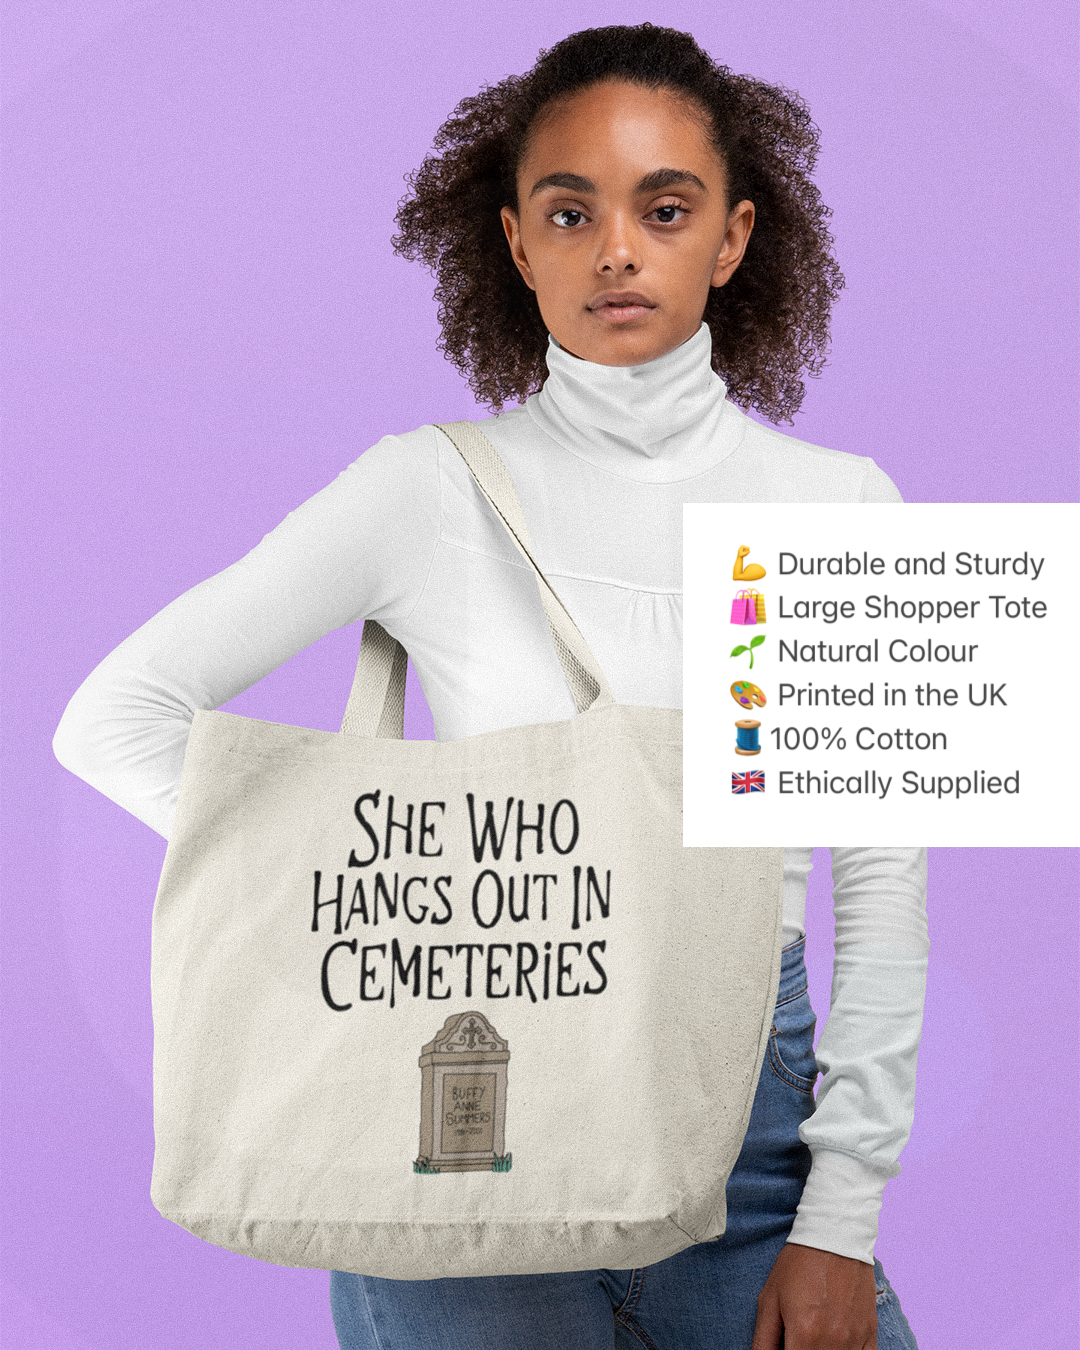 She Who Hangs Out In Cemeteries Buffy Inspired Tote Bag - She Who Hangs Out In Cemeteries Tote Bag - Buffy The Vampire Slayer Inspired Tote Bag - Slayer Shopper Tote Bag